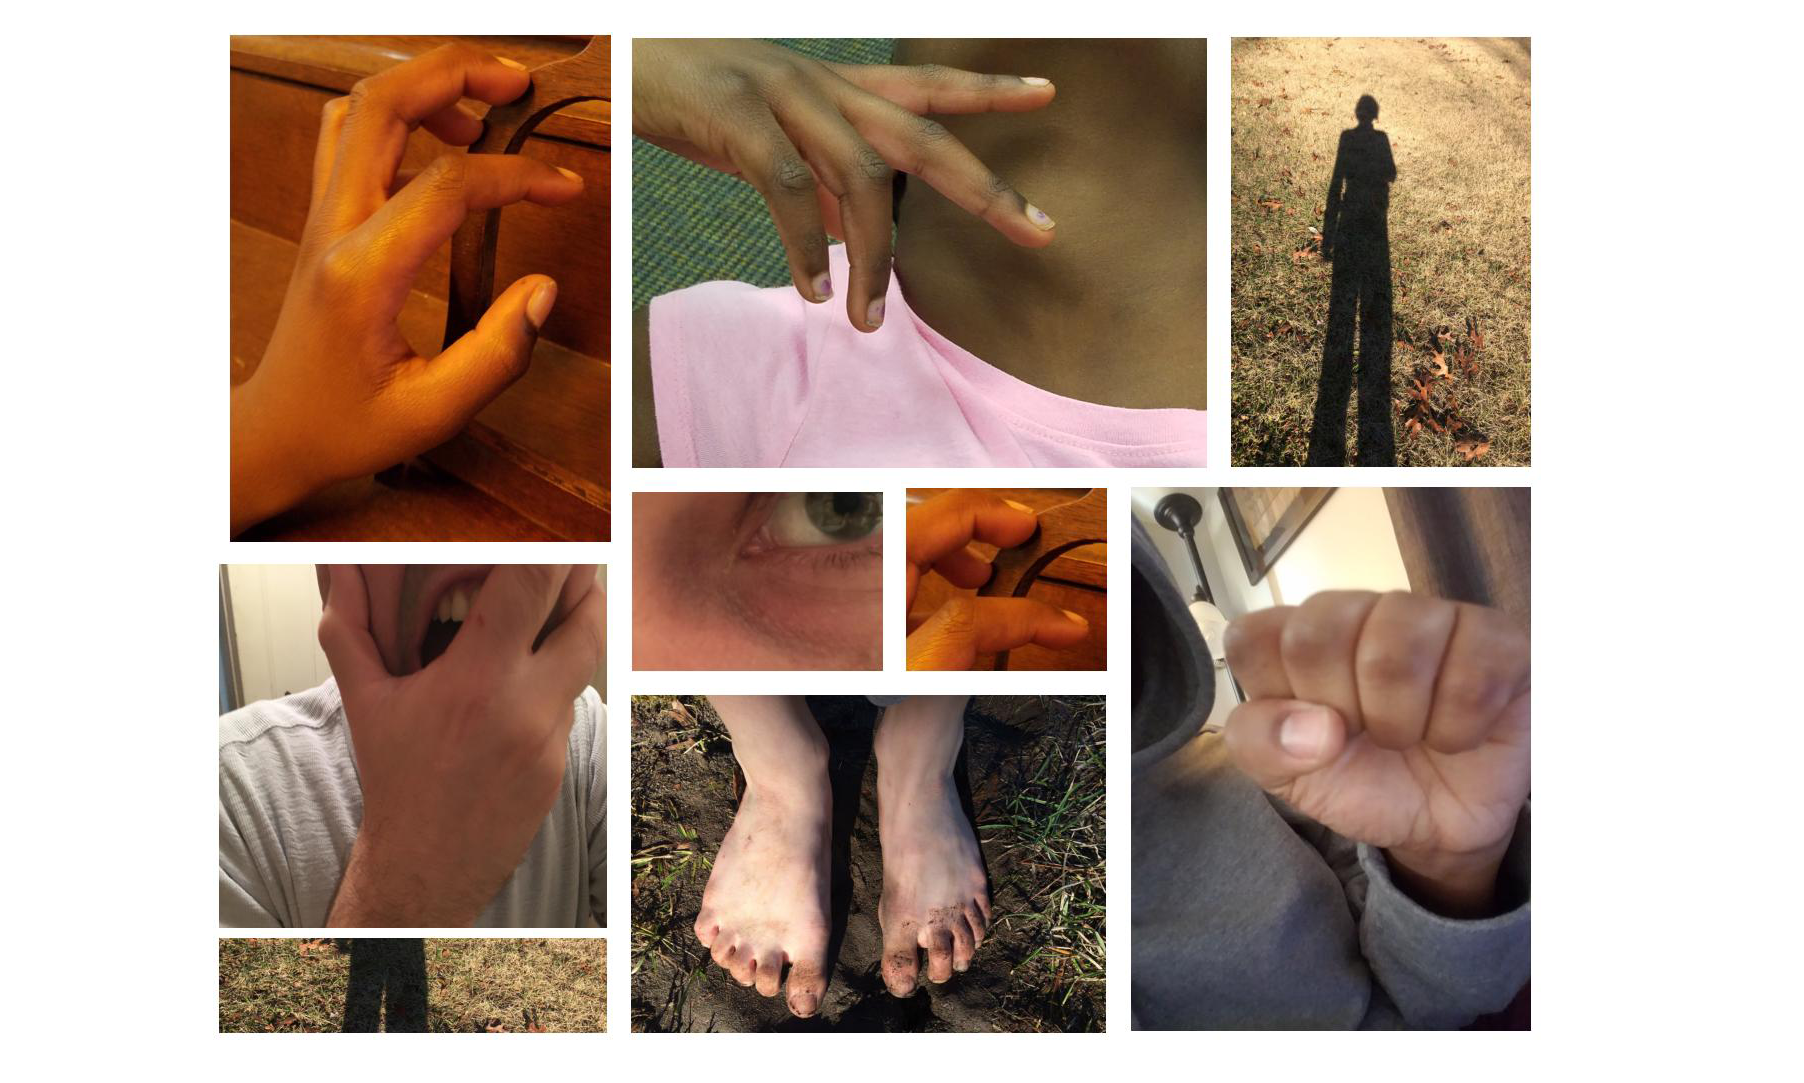 collage of close-up body images, including hands and feet